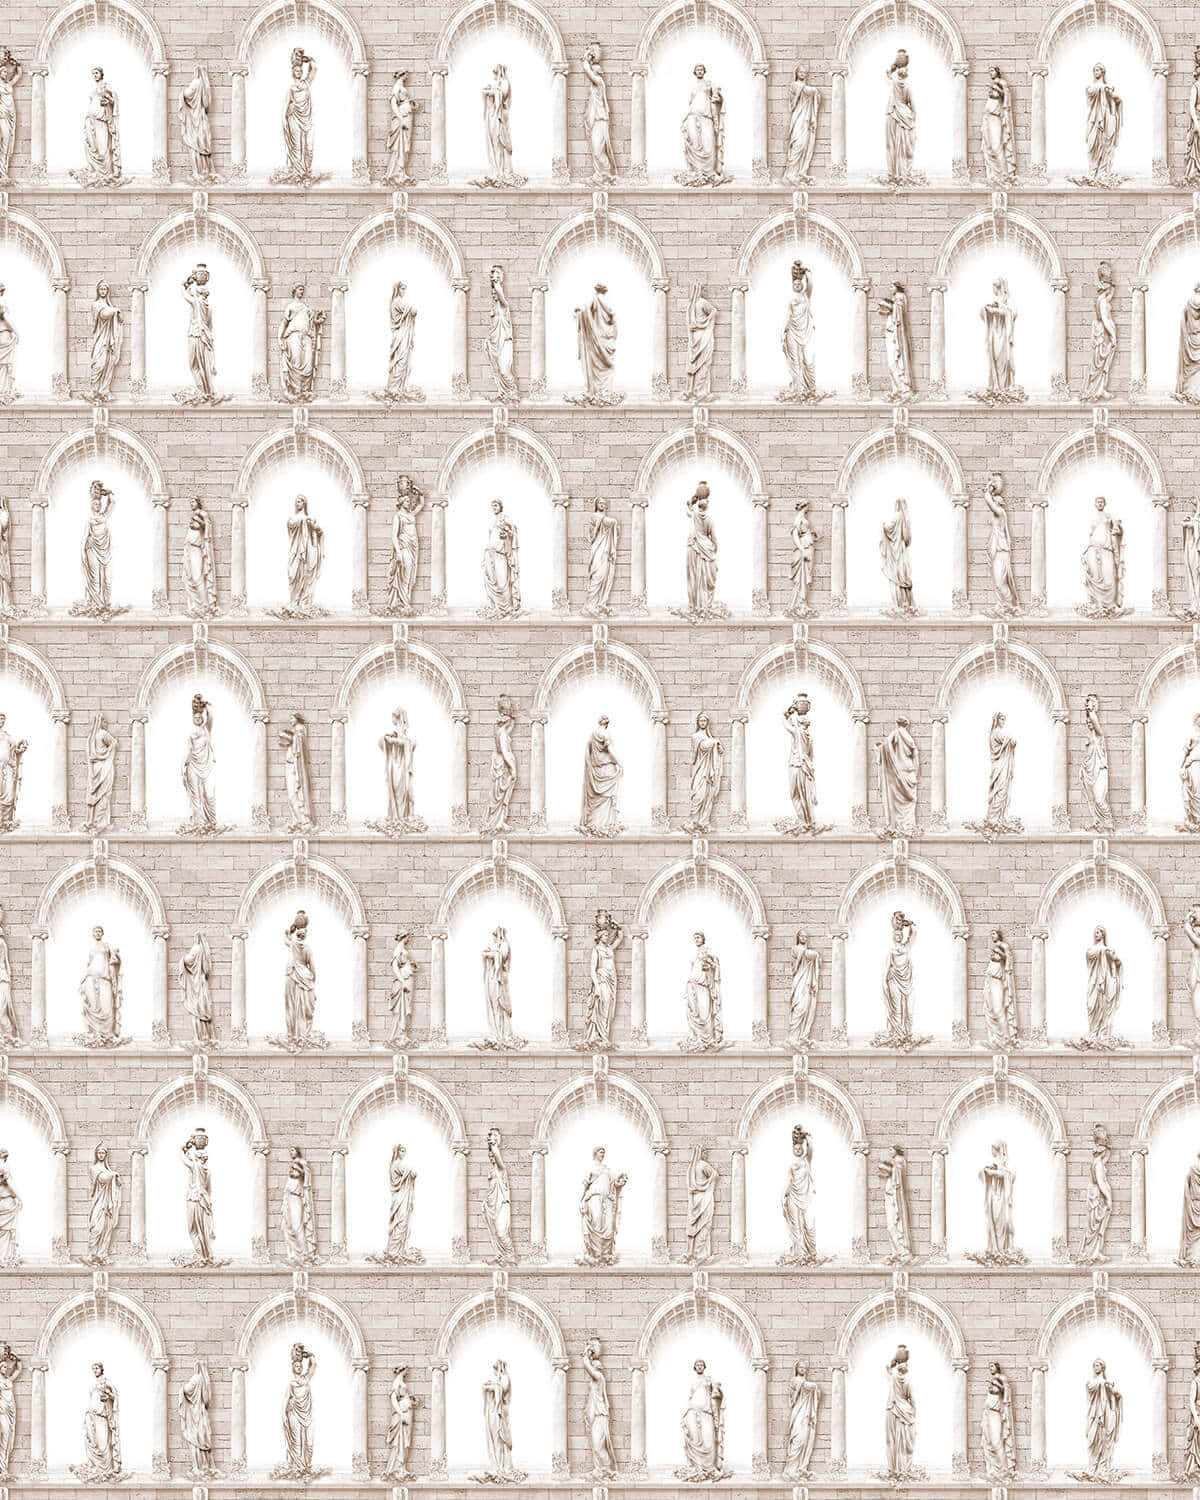 A Pattern Of People In A Room